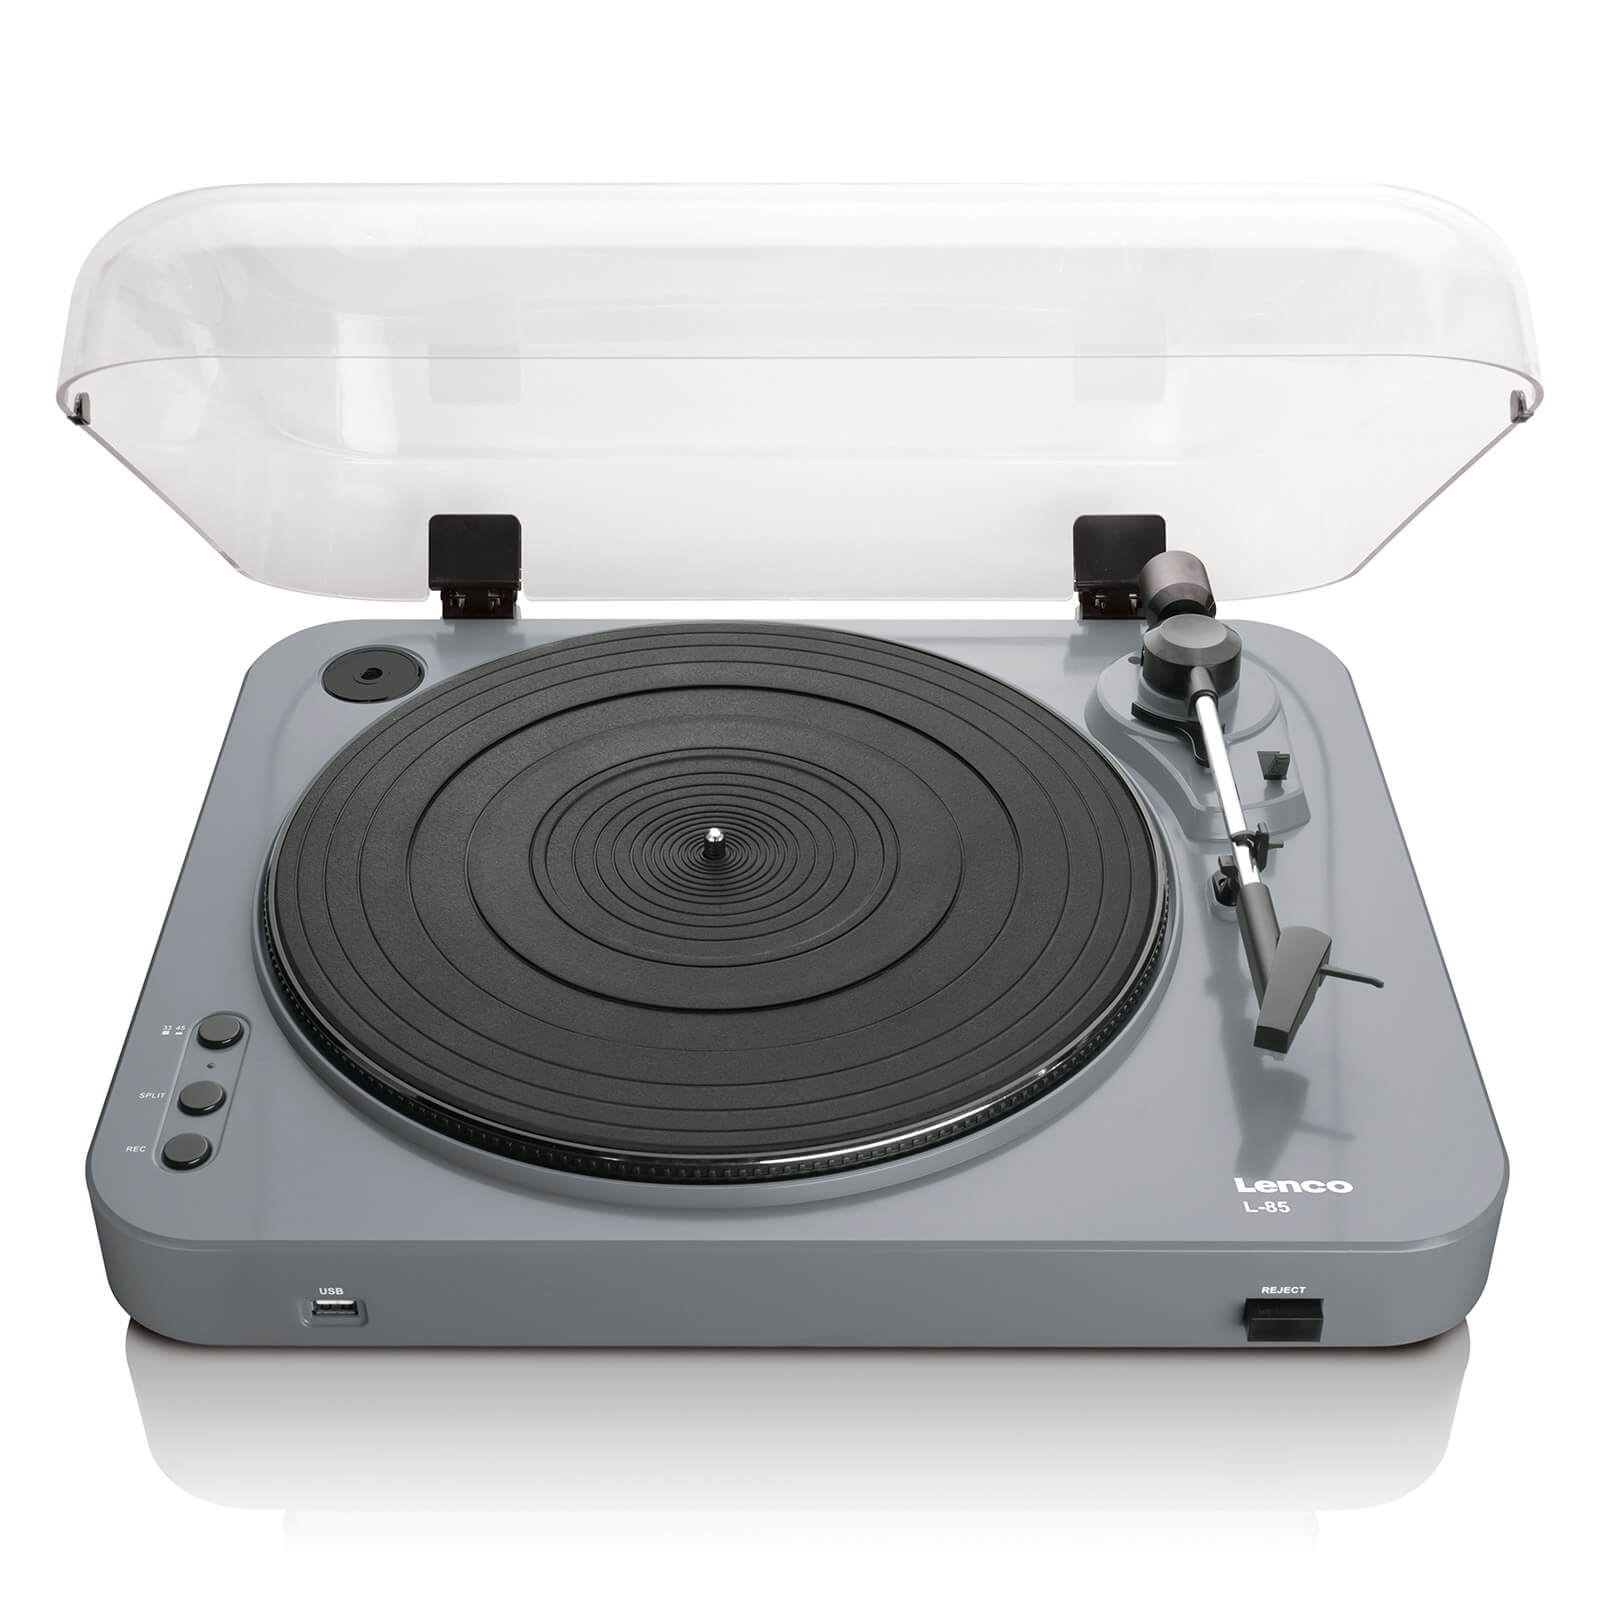 Lenco L-85 USB Turntable with Direct Recording - Grey